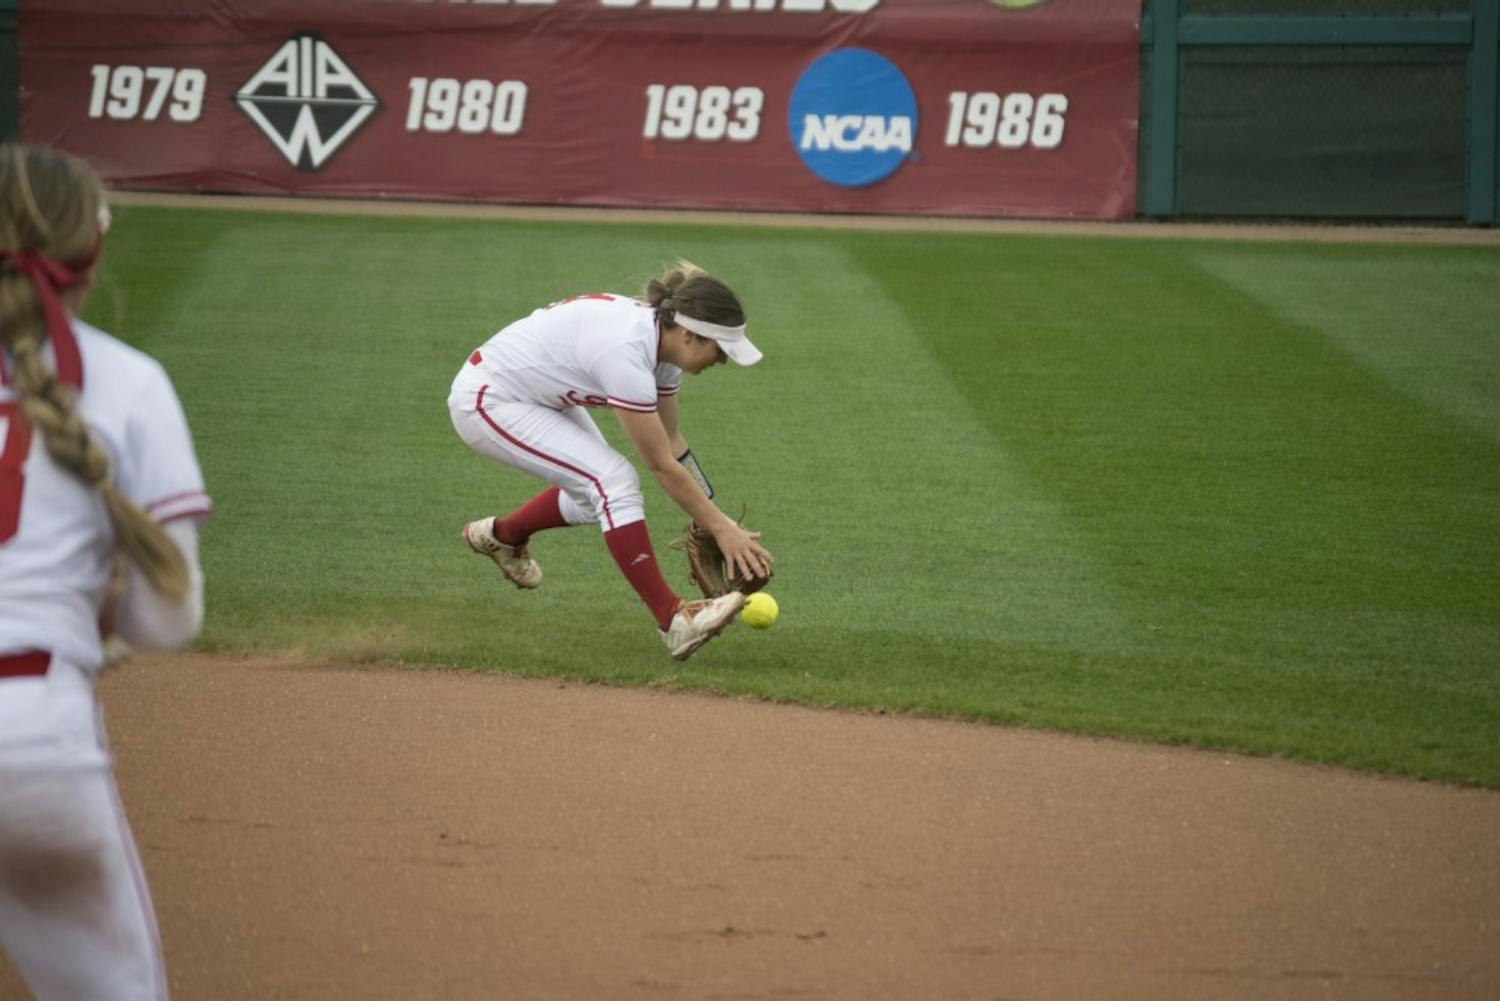 Second baseman Erin Lehman fields a grounder in the gap in hopes of making a play at first during the second of two games against the Boilermakers on Tuesday. IU beat Purdue 4-0 in the first game while Purdue took the second 2-1.